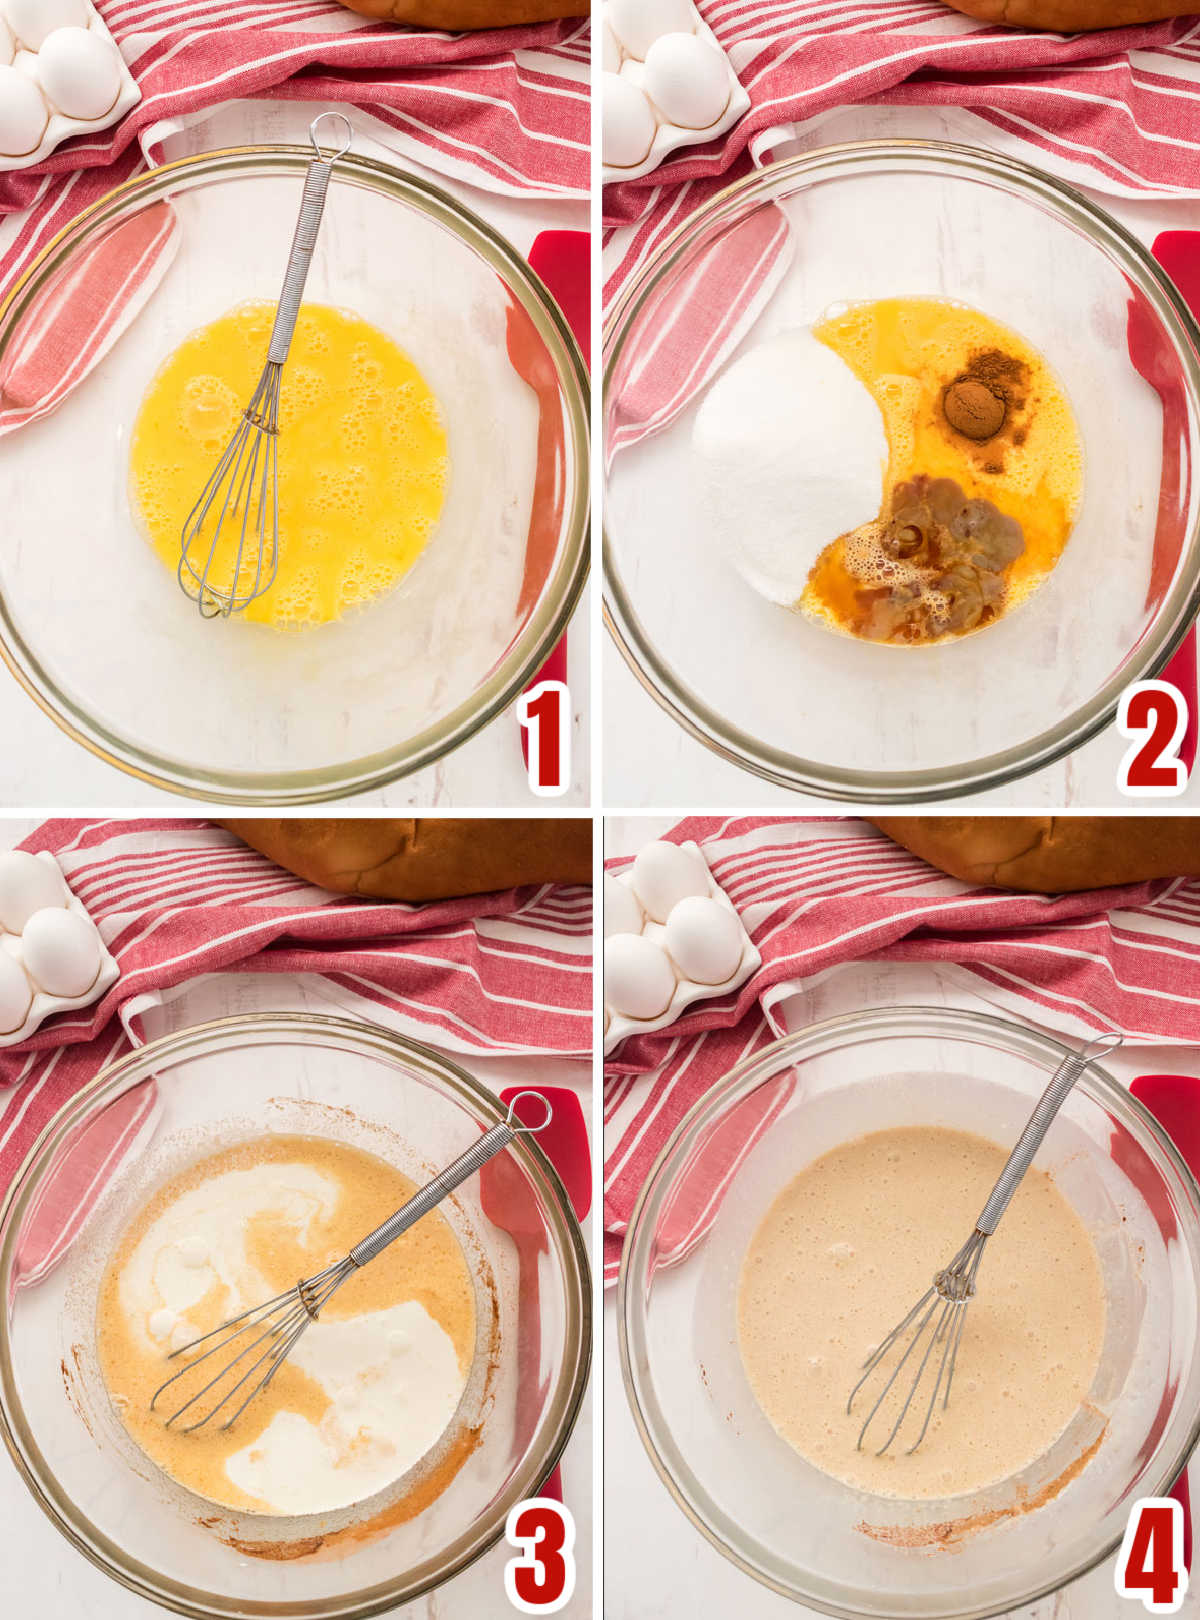 Collage image showing how to make the custard for the Bread Pudding